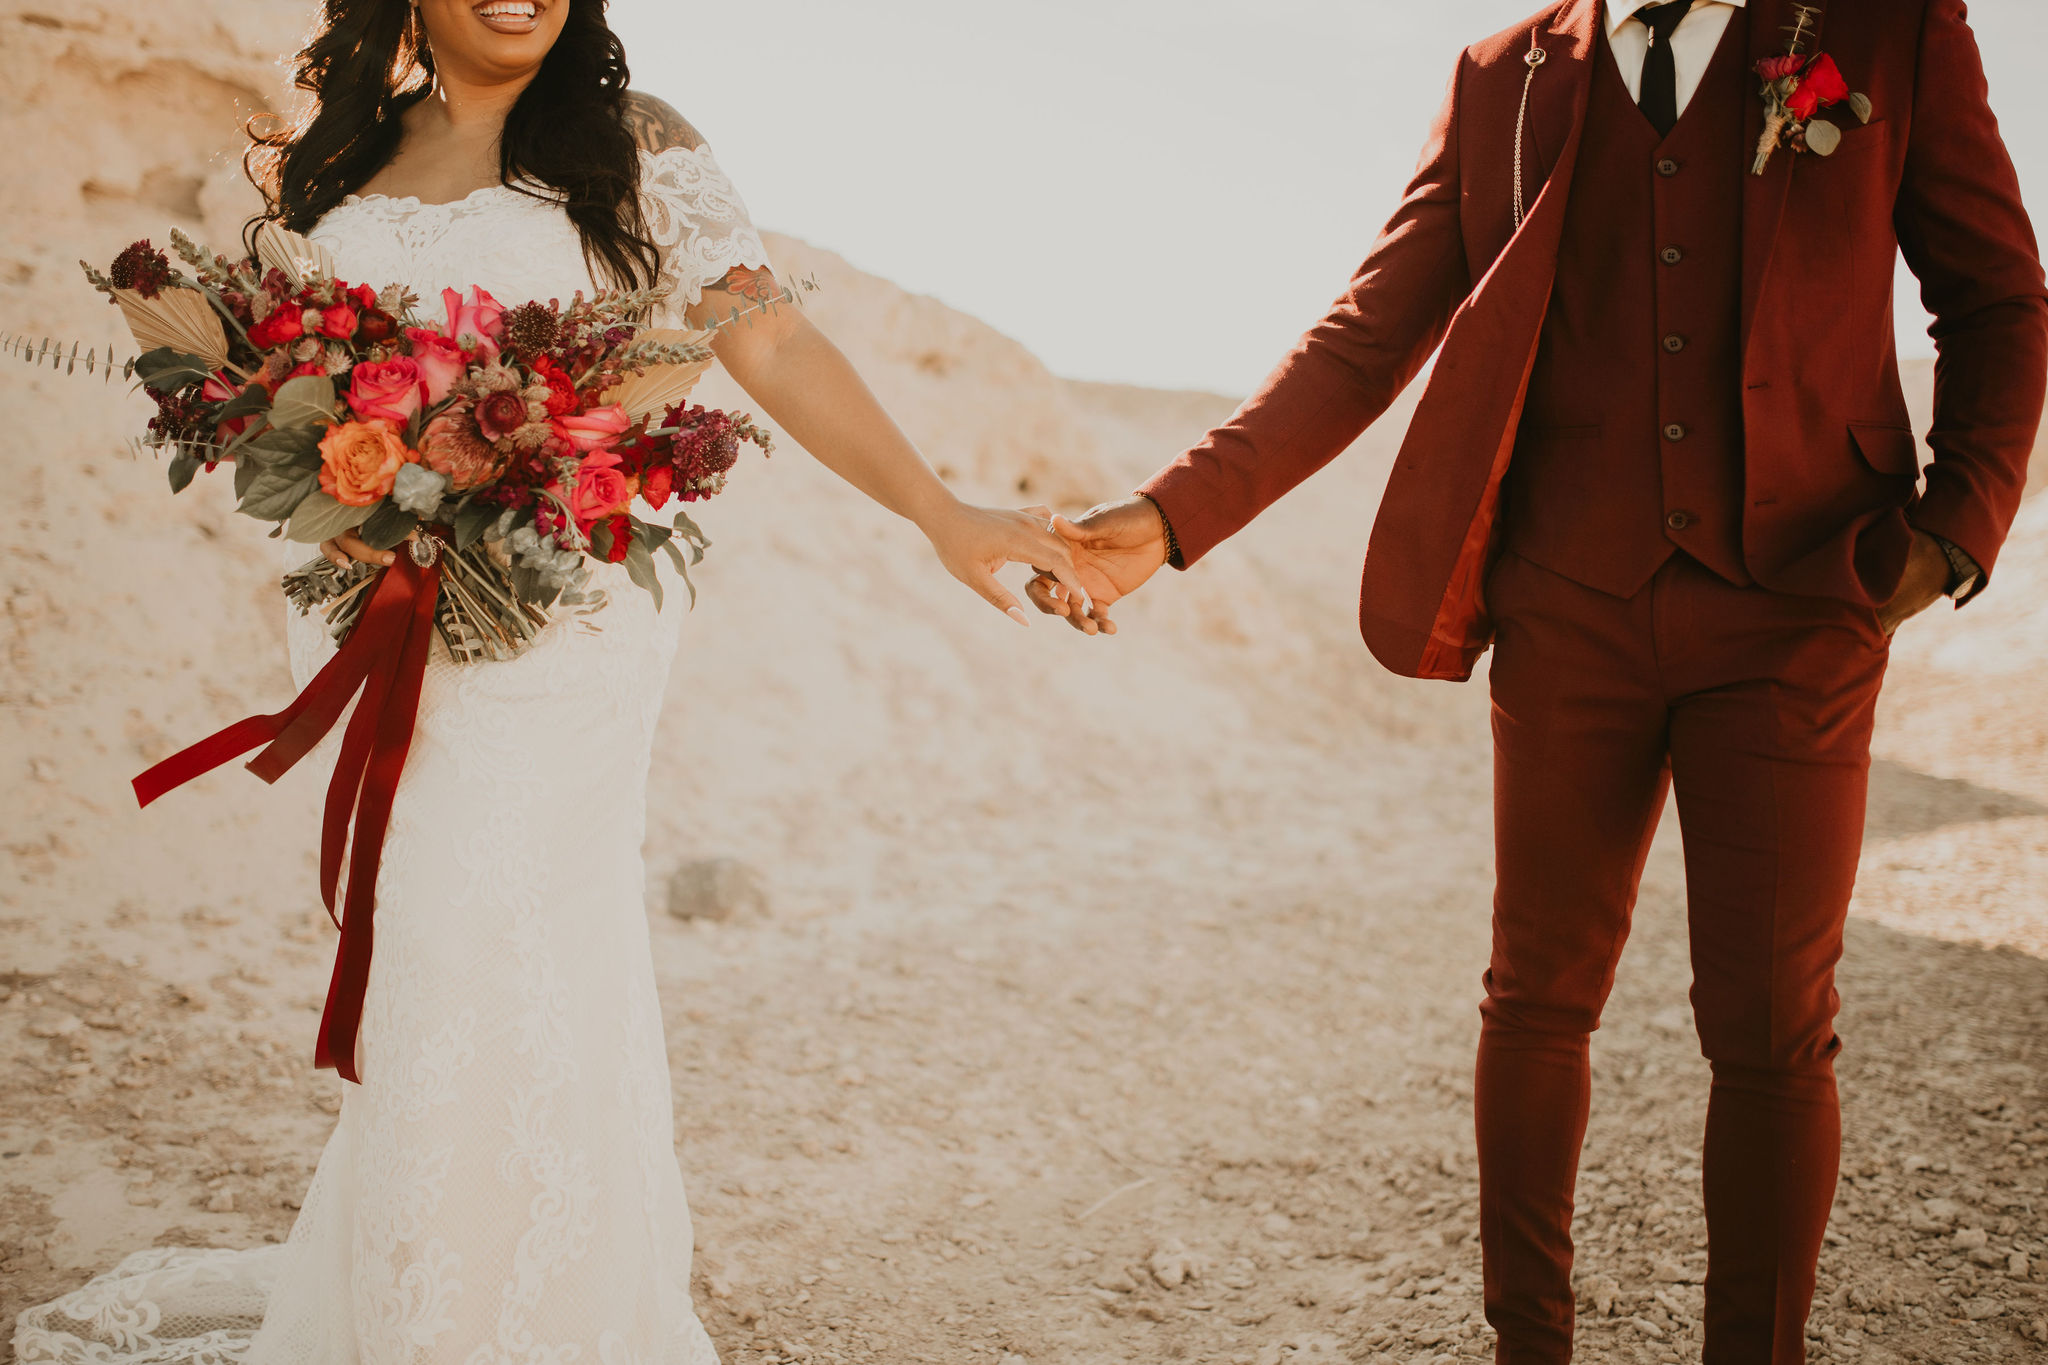 Bride Smiling with Bouquet Holding Hands with Groom in Burgundy Suit Jewel Tone Las Vegas Elopement 